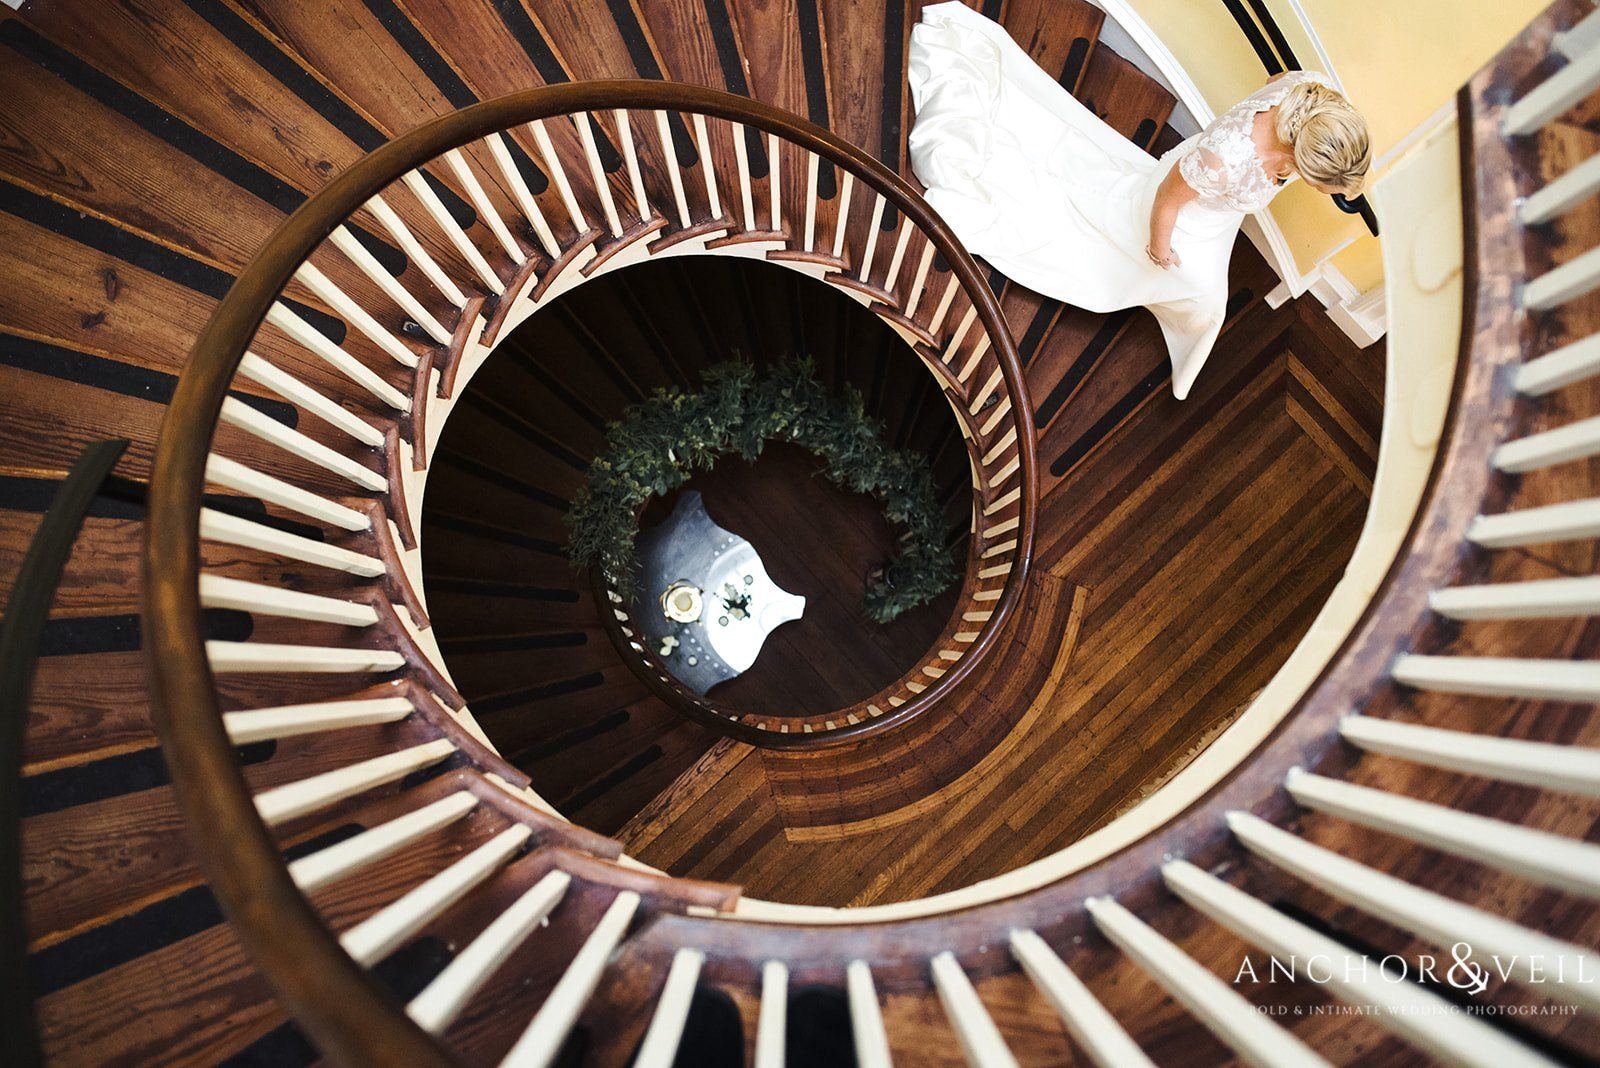 Walking down the spiral staircase at the Lowndes Grove Plantation Wedding